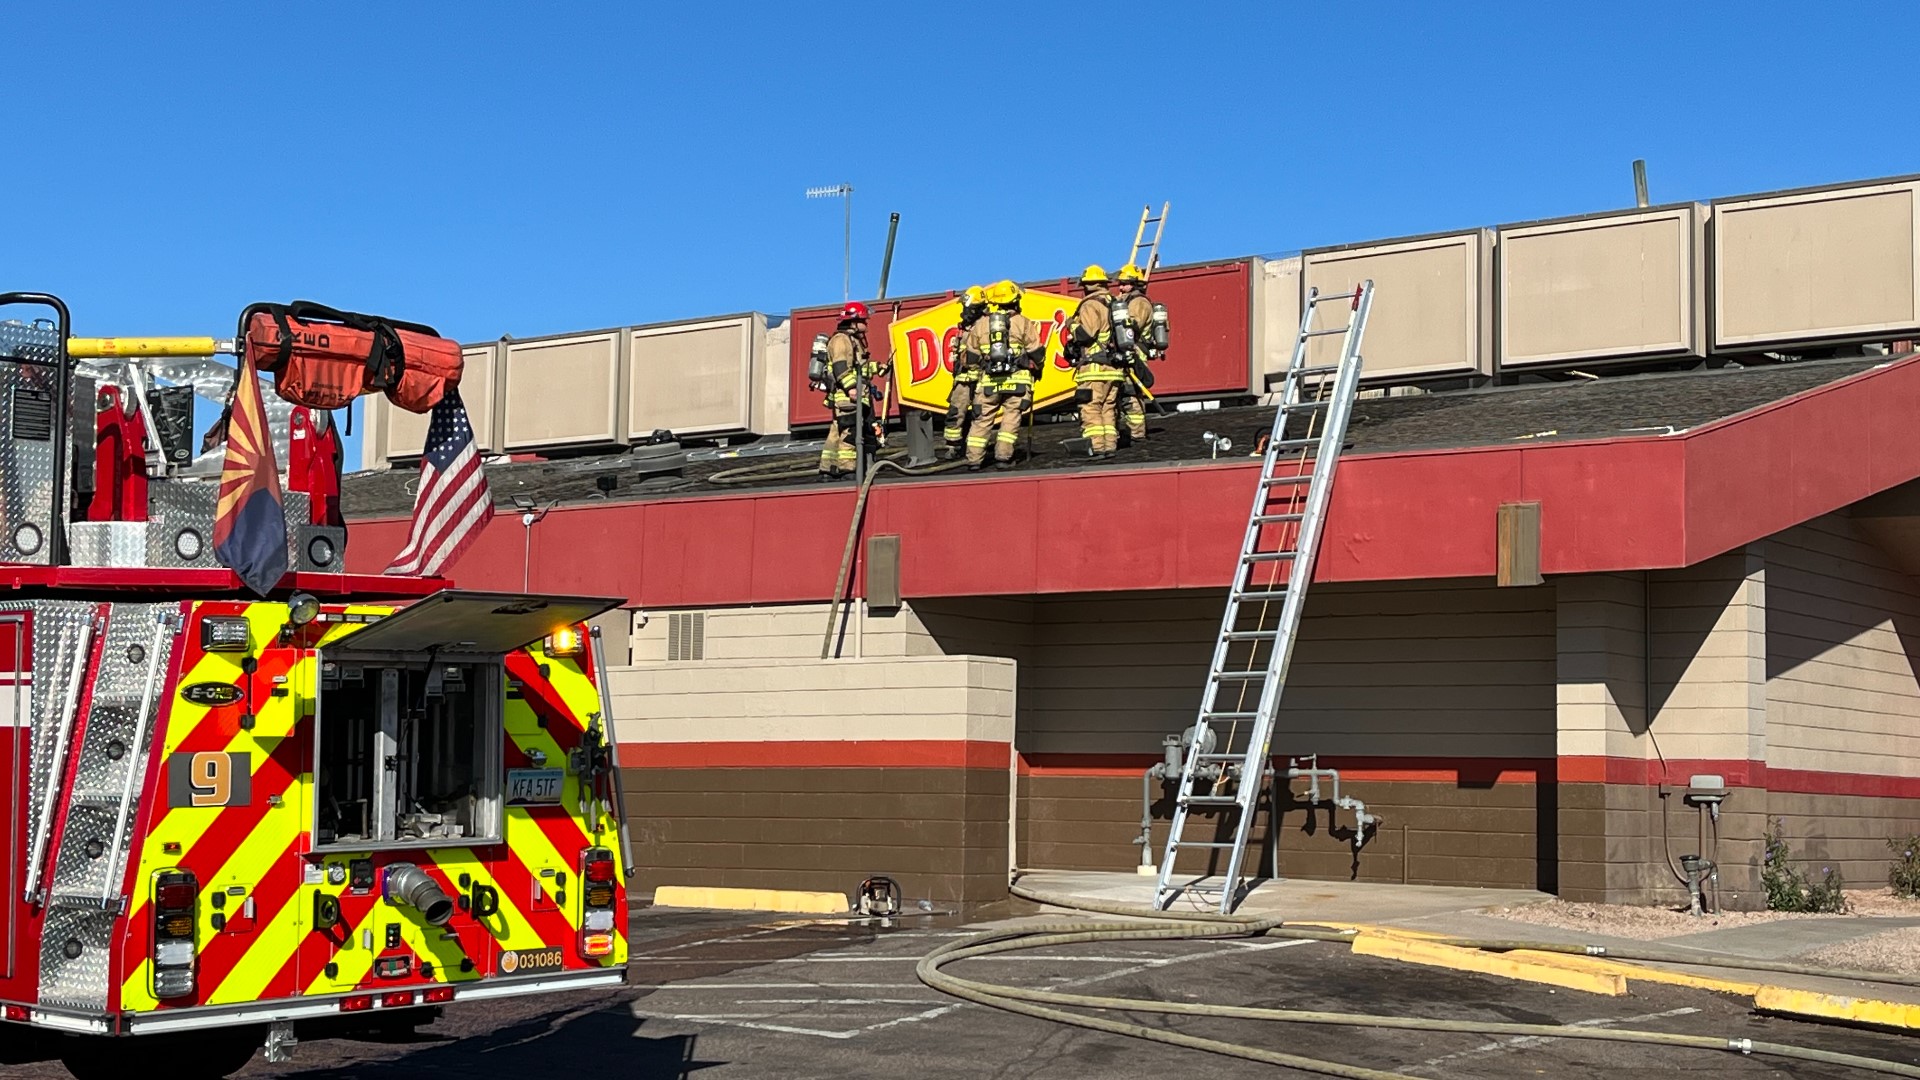 The fire department said the fire is at the restaurant located at 7th Street and Camelback Road.